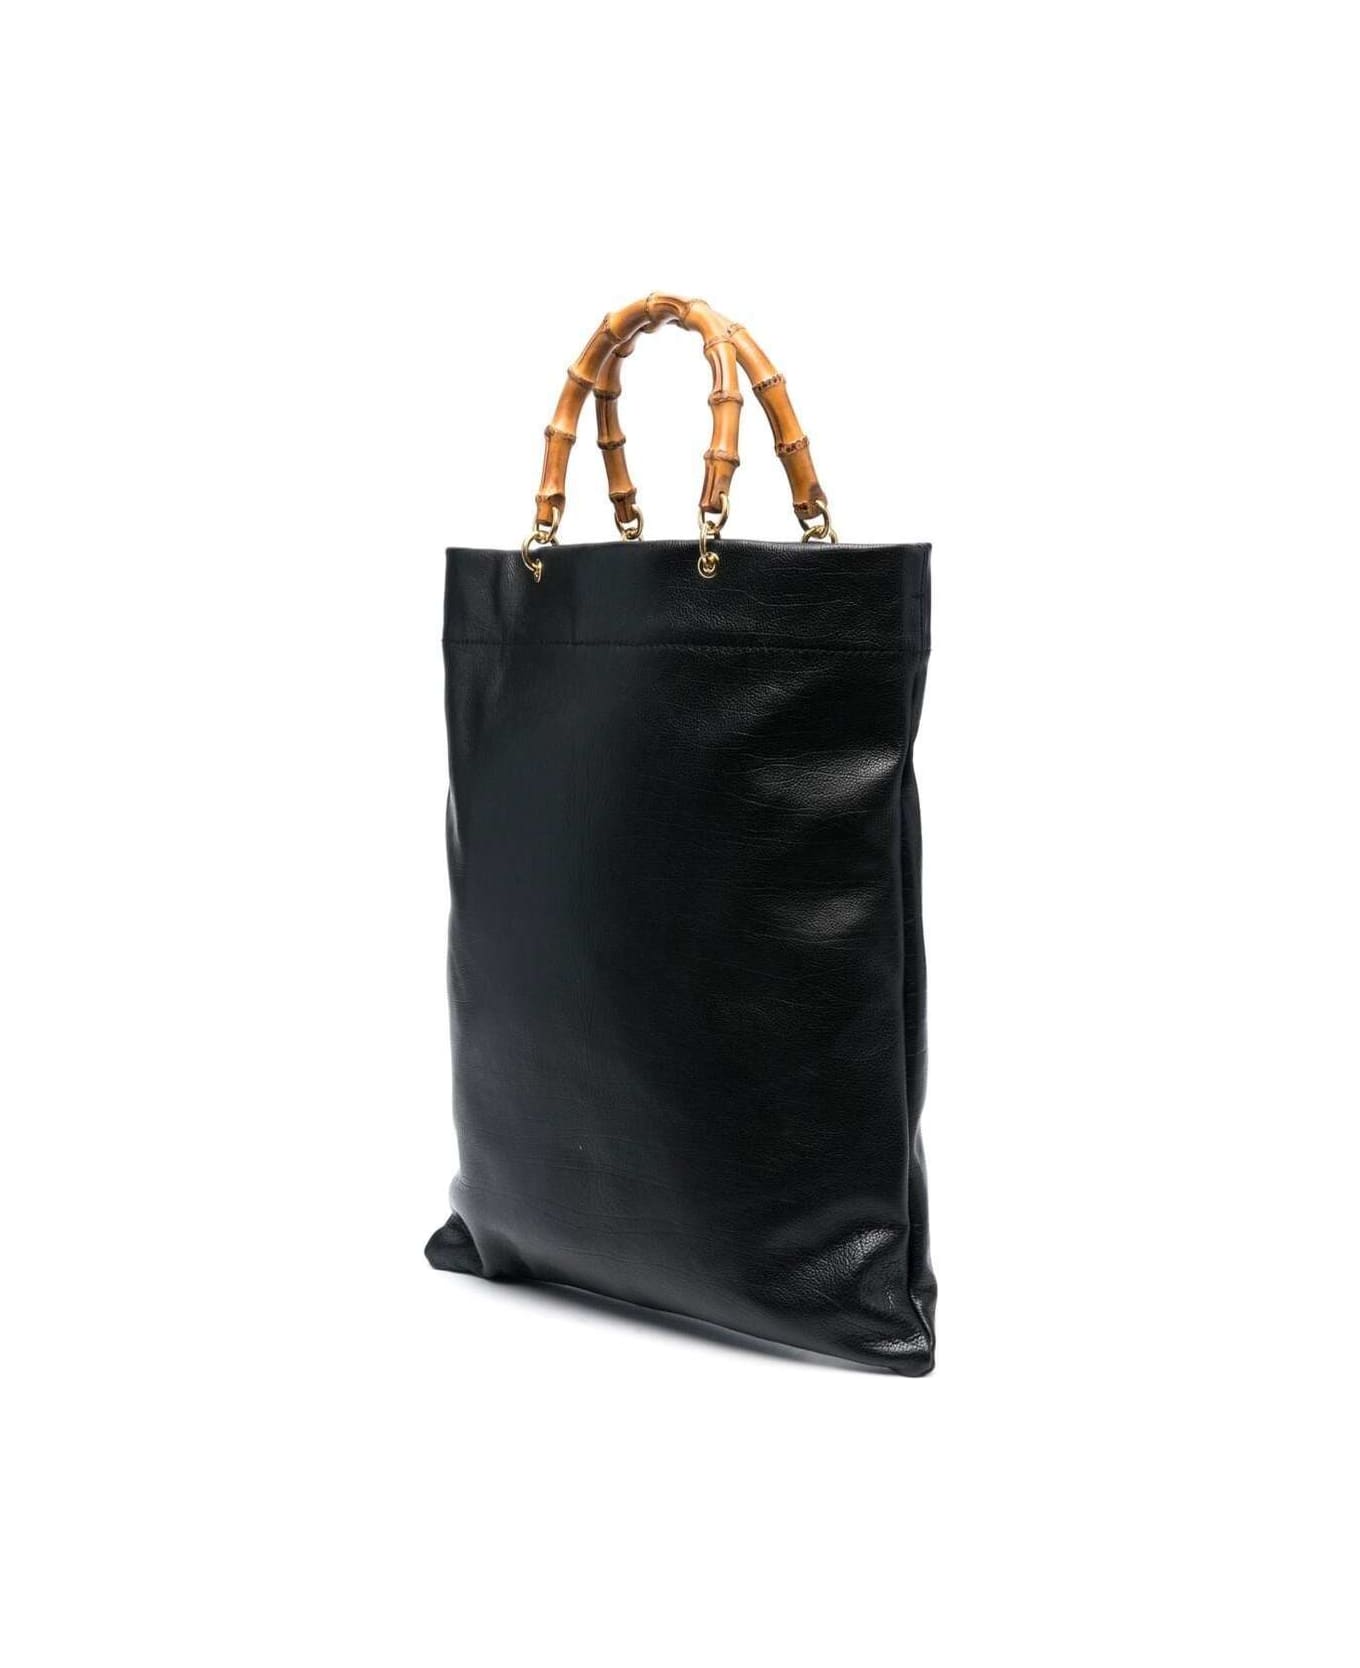 Jil Sander Black Tote Bag With Bamboo Handles In Leather Woman - Black トートバッグ